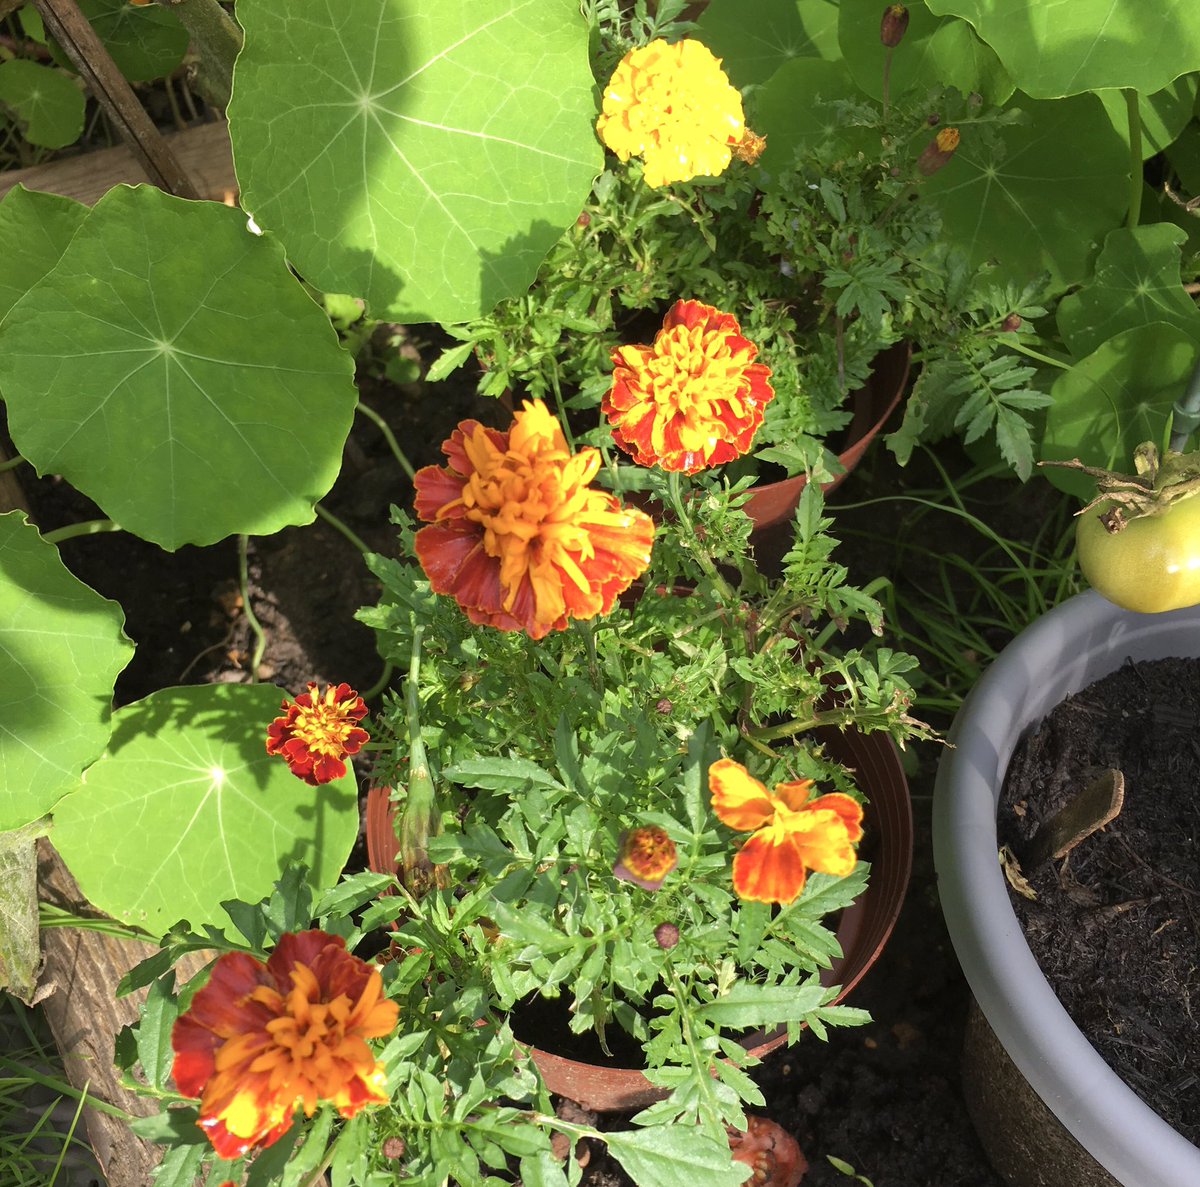 Daily, I remain amazed at how things continue to grow in the garden, even as we approach the second week of October with frequent heavy rains and cold. Seeing the petunias, French marigolds and nasturtium which I sowed, still flowering in all their beauty, fills me with such joy.